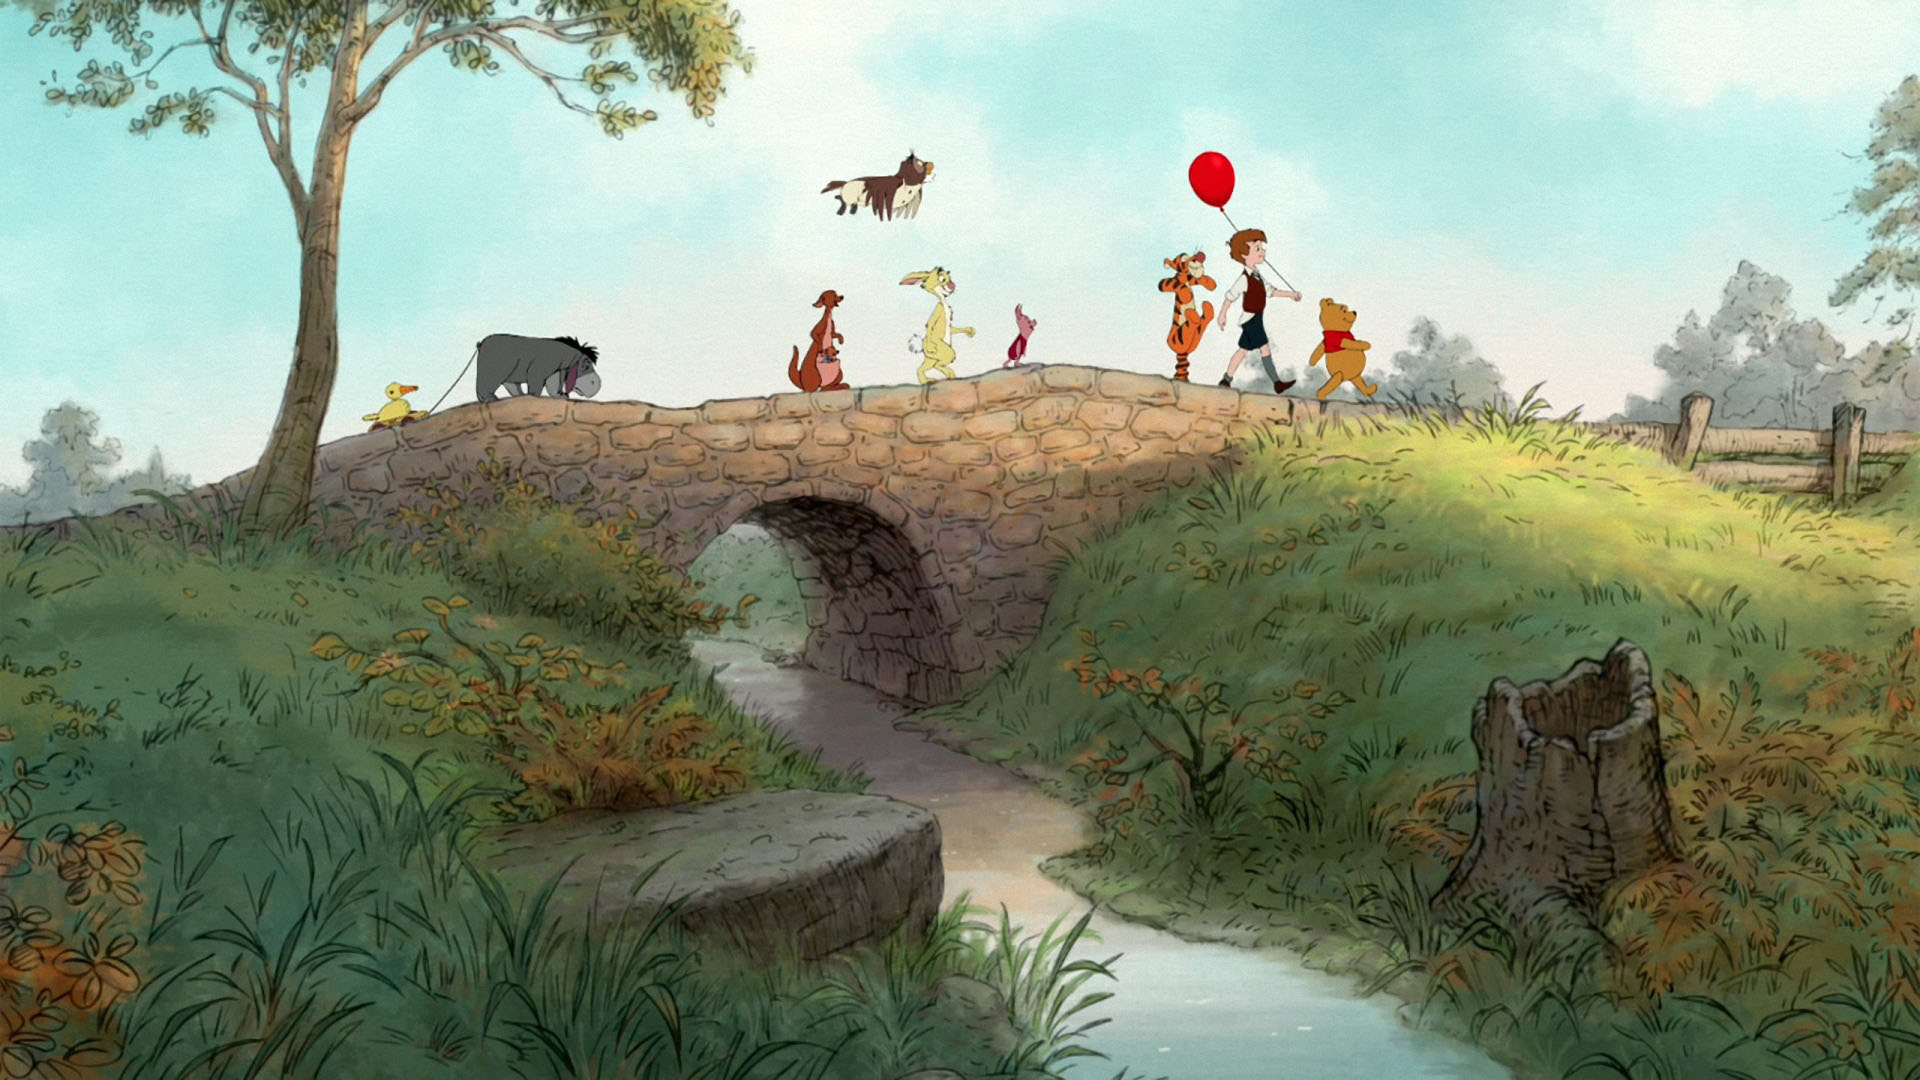 Winnie the Pooh Wallpaper 1920x1080 Wallpapers 1920x1080 Wallpapers